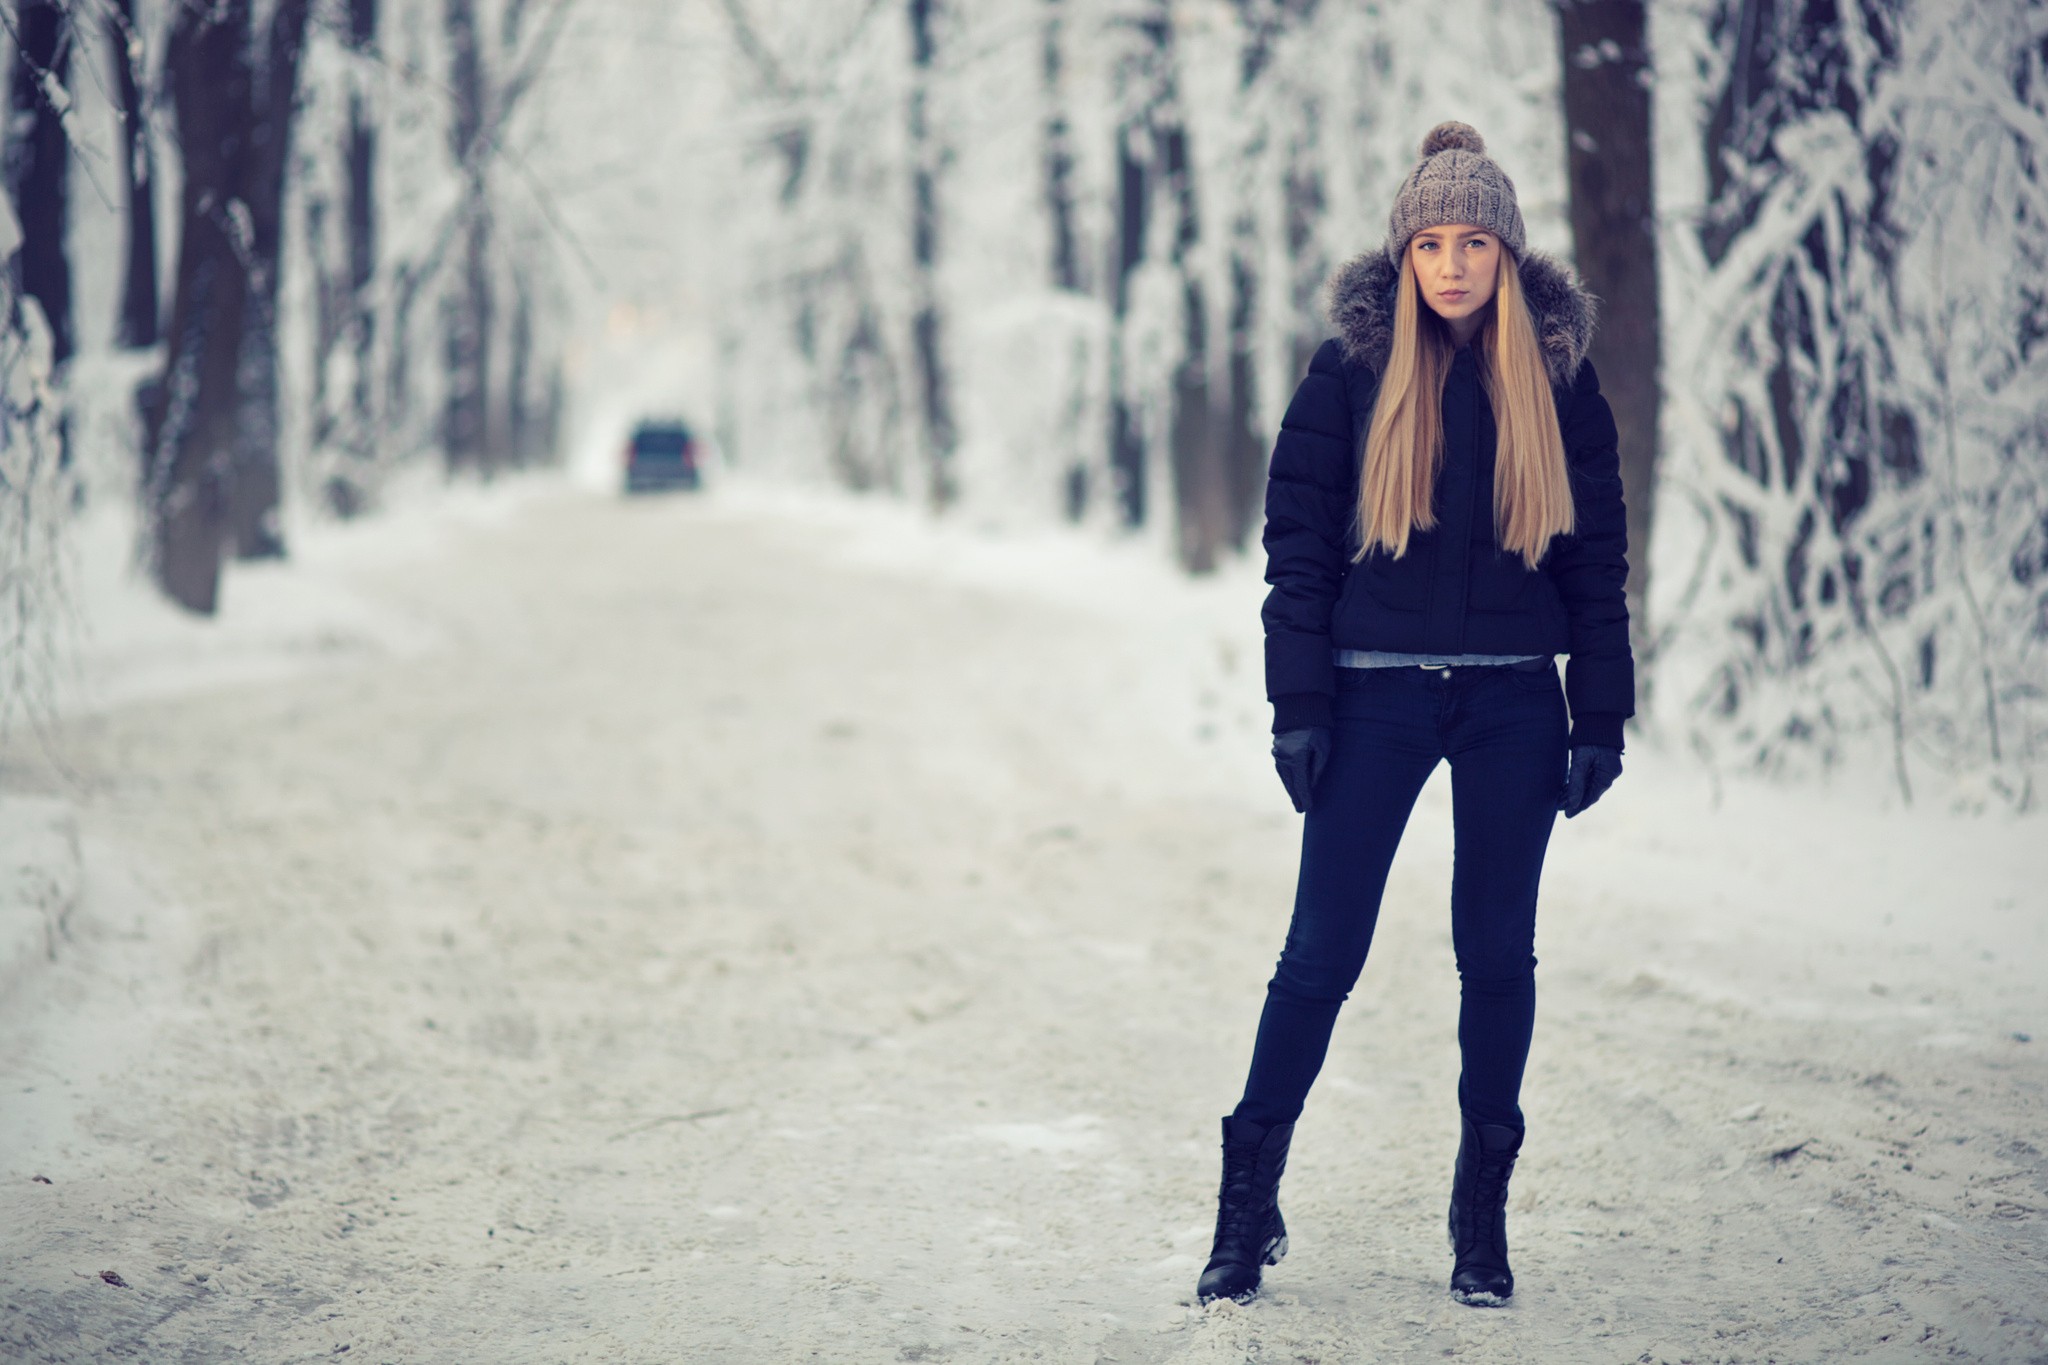 Women Blonde Jacket Winter Standing Outdoors Long Hair Straight Hair Knit Hat Looking Away Road Snow 2048x1365